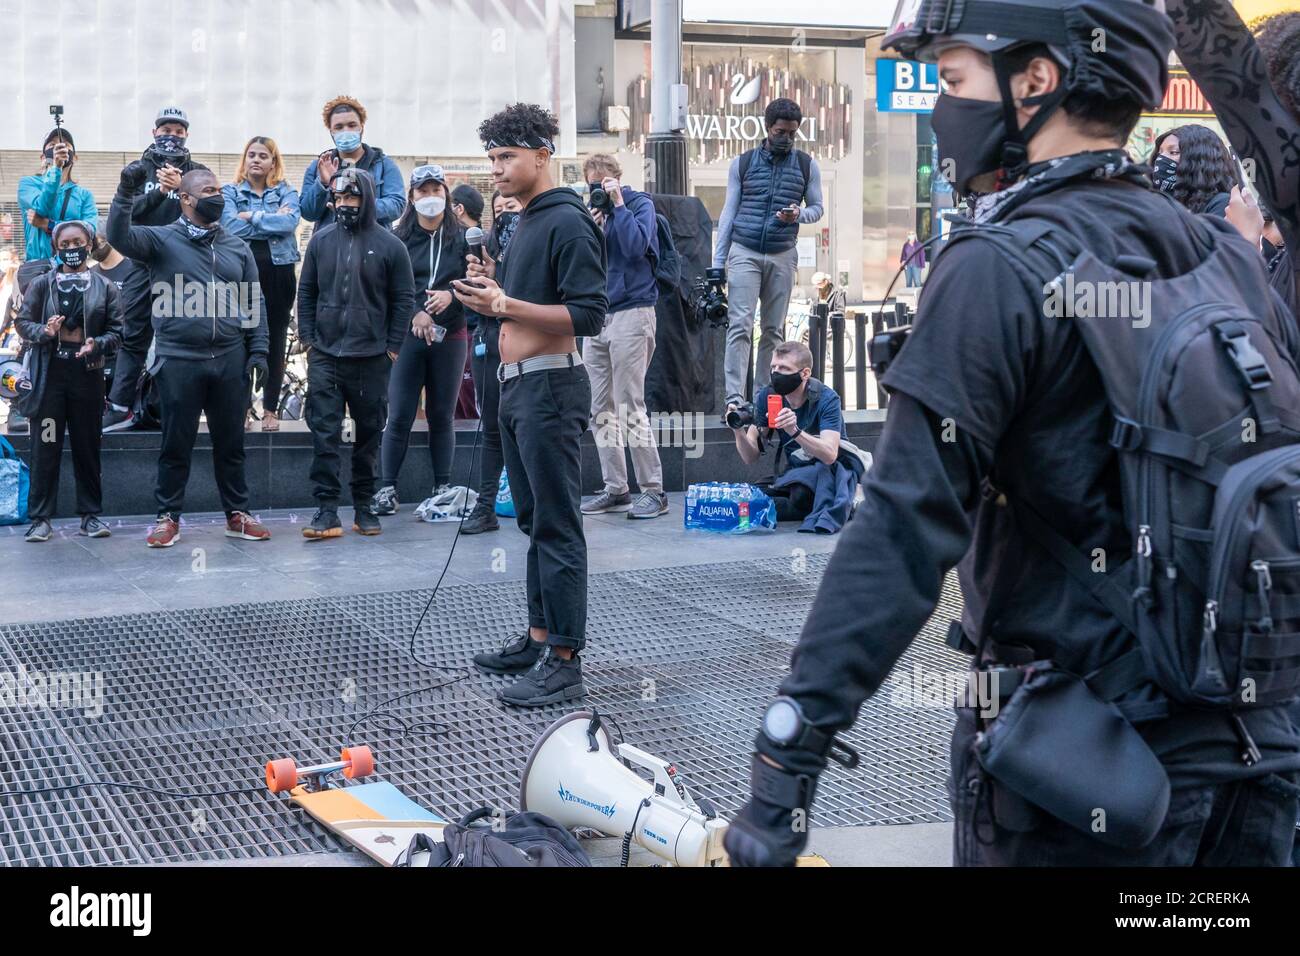 NEW YORK, NY - SEPTEMBER 19, 2020: Police arrest 86 people at a protest against the Immigration and Customs Enforcement agency (ICE) in Times Square. Stock Photo